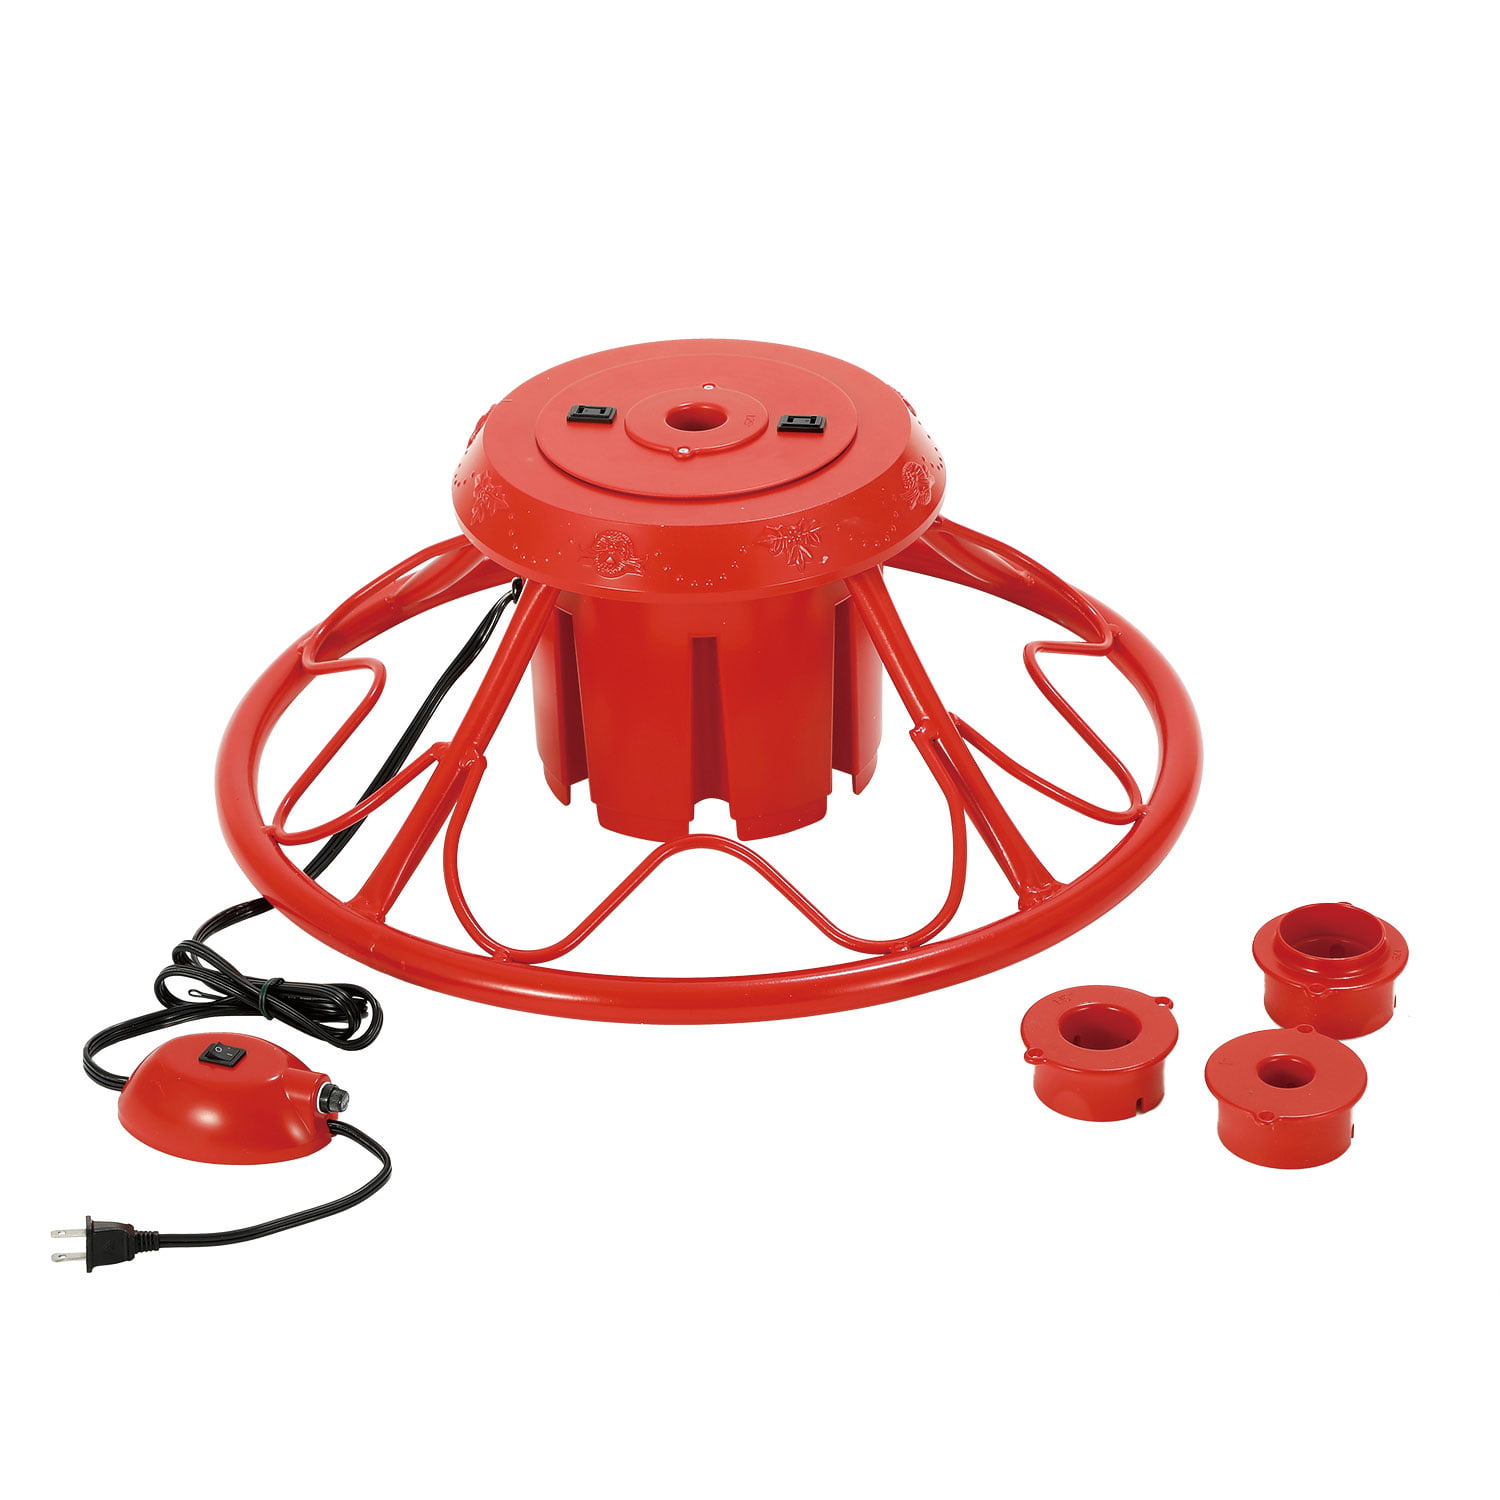 Home Heritage Electric Rotating Stand Base for Artificial Christmas Trees, Red - Walmart.com